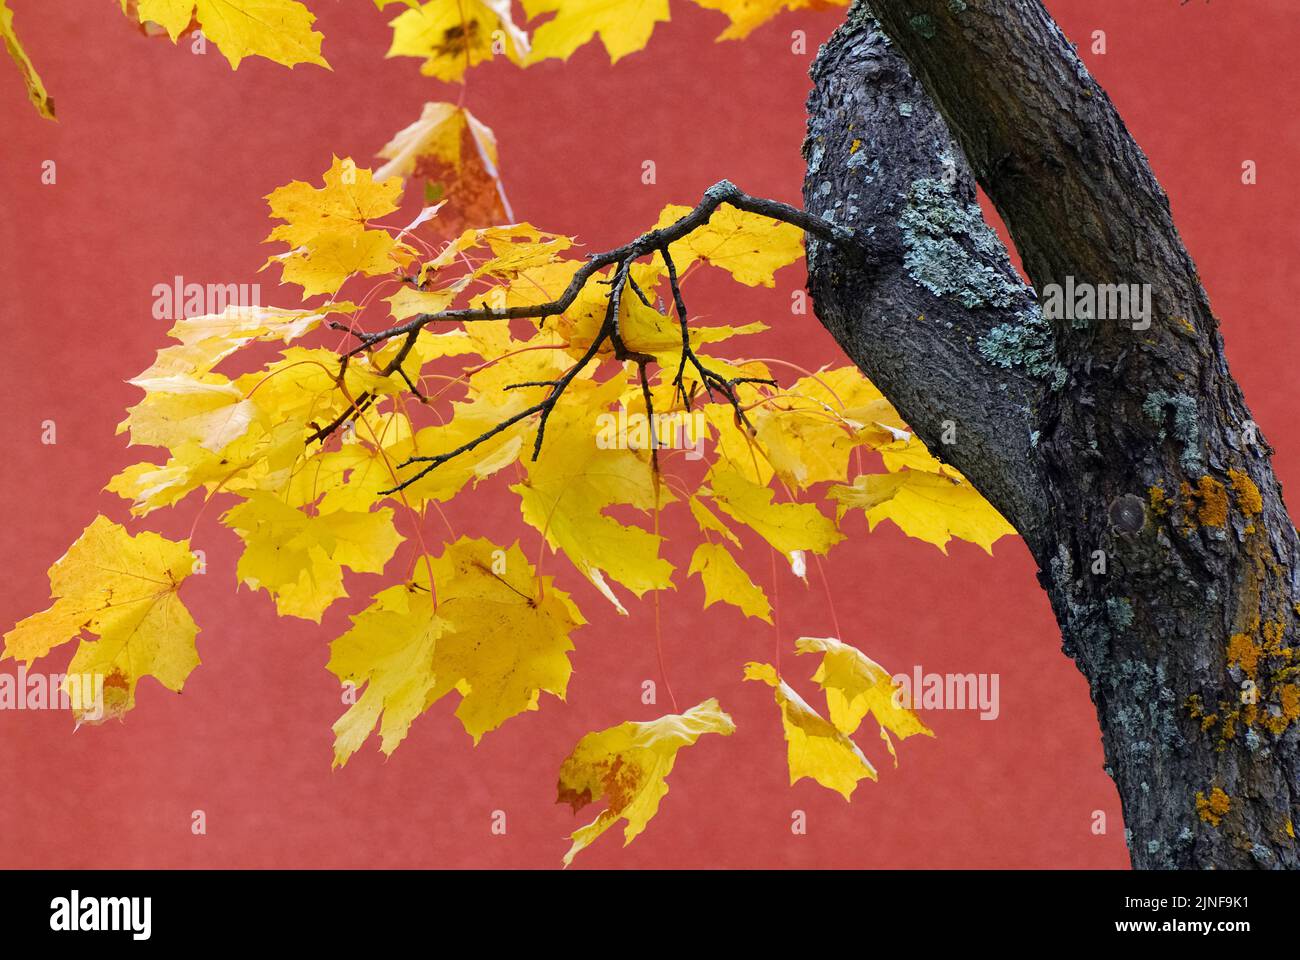 Maple tree leaves (Acer platanoides) in vibrant autumn colors. Ornamental tree against defocused red wall of a building. Stock Photo